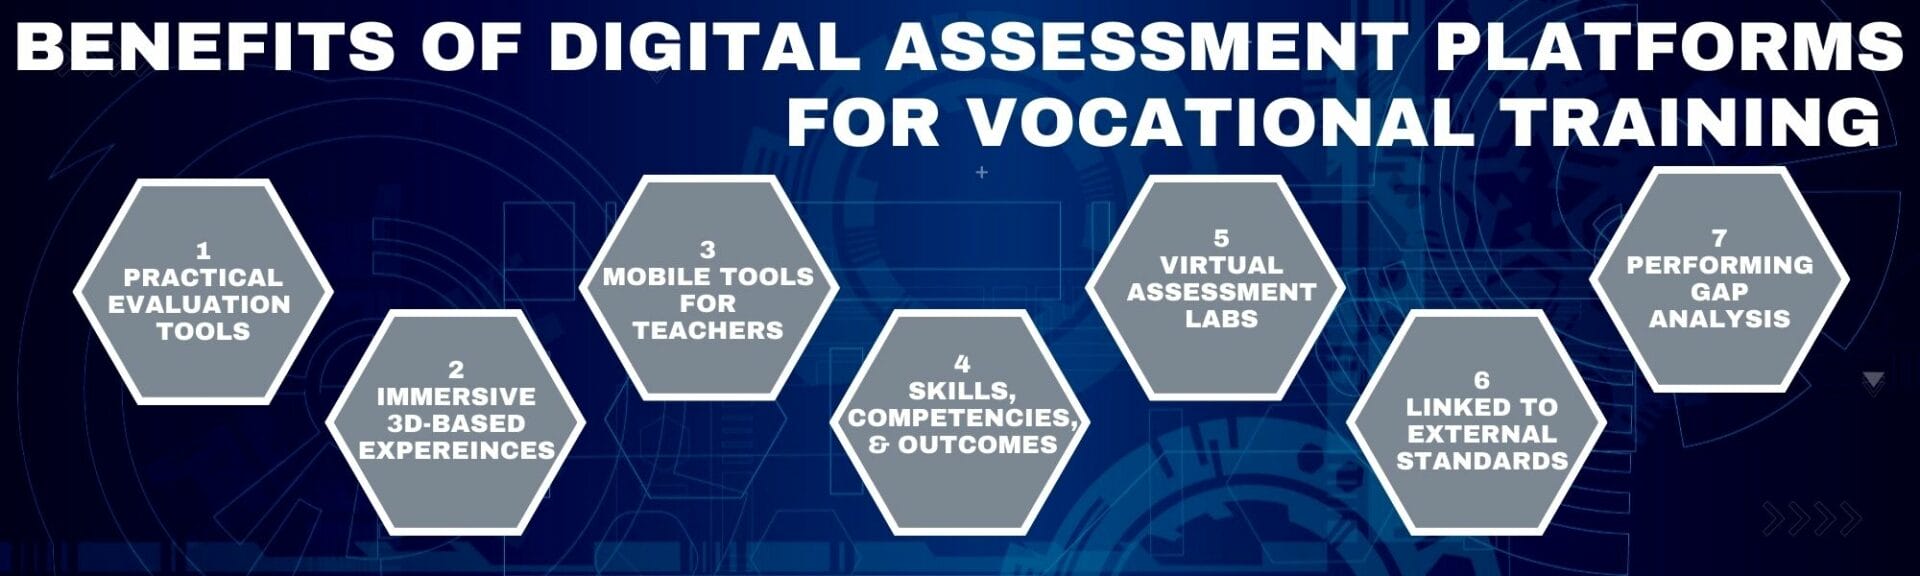 How Digital Assessment Platforms are Beneficial for Vocational Assessments